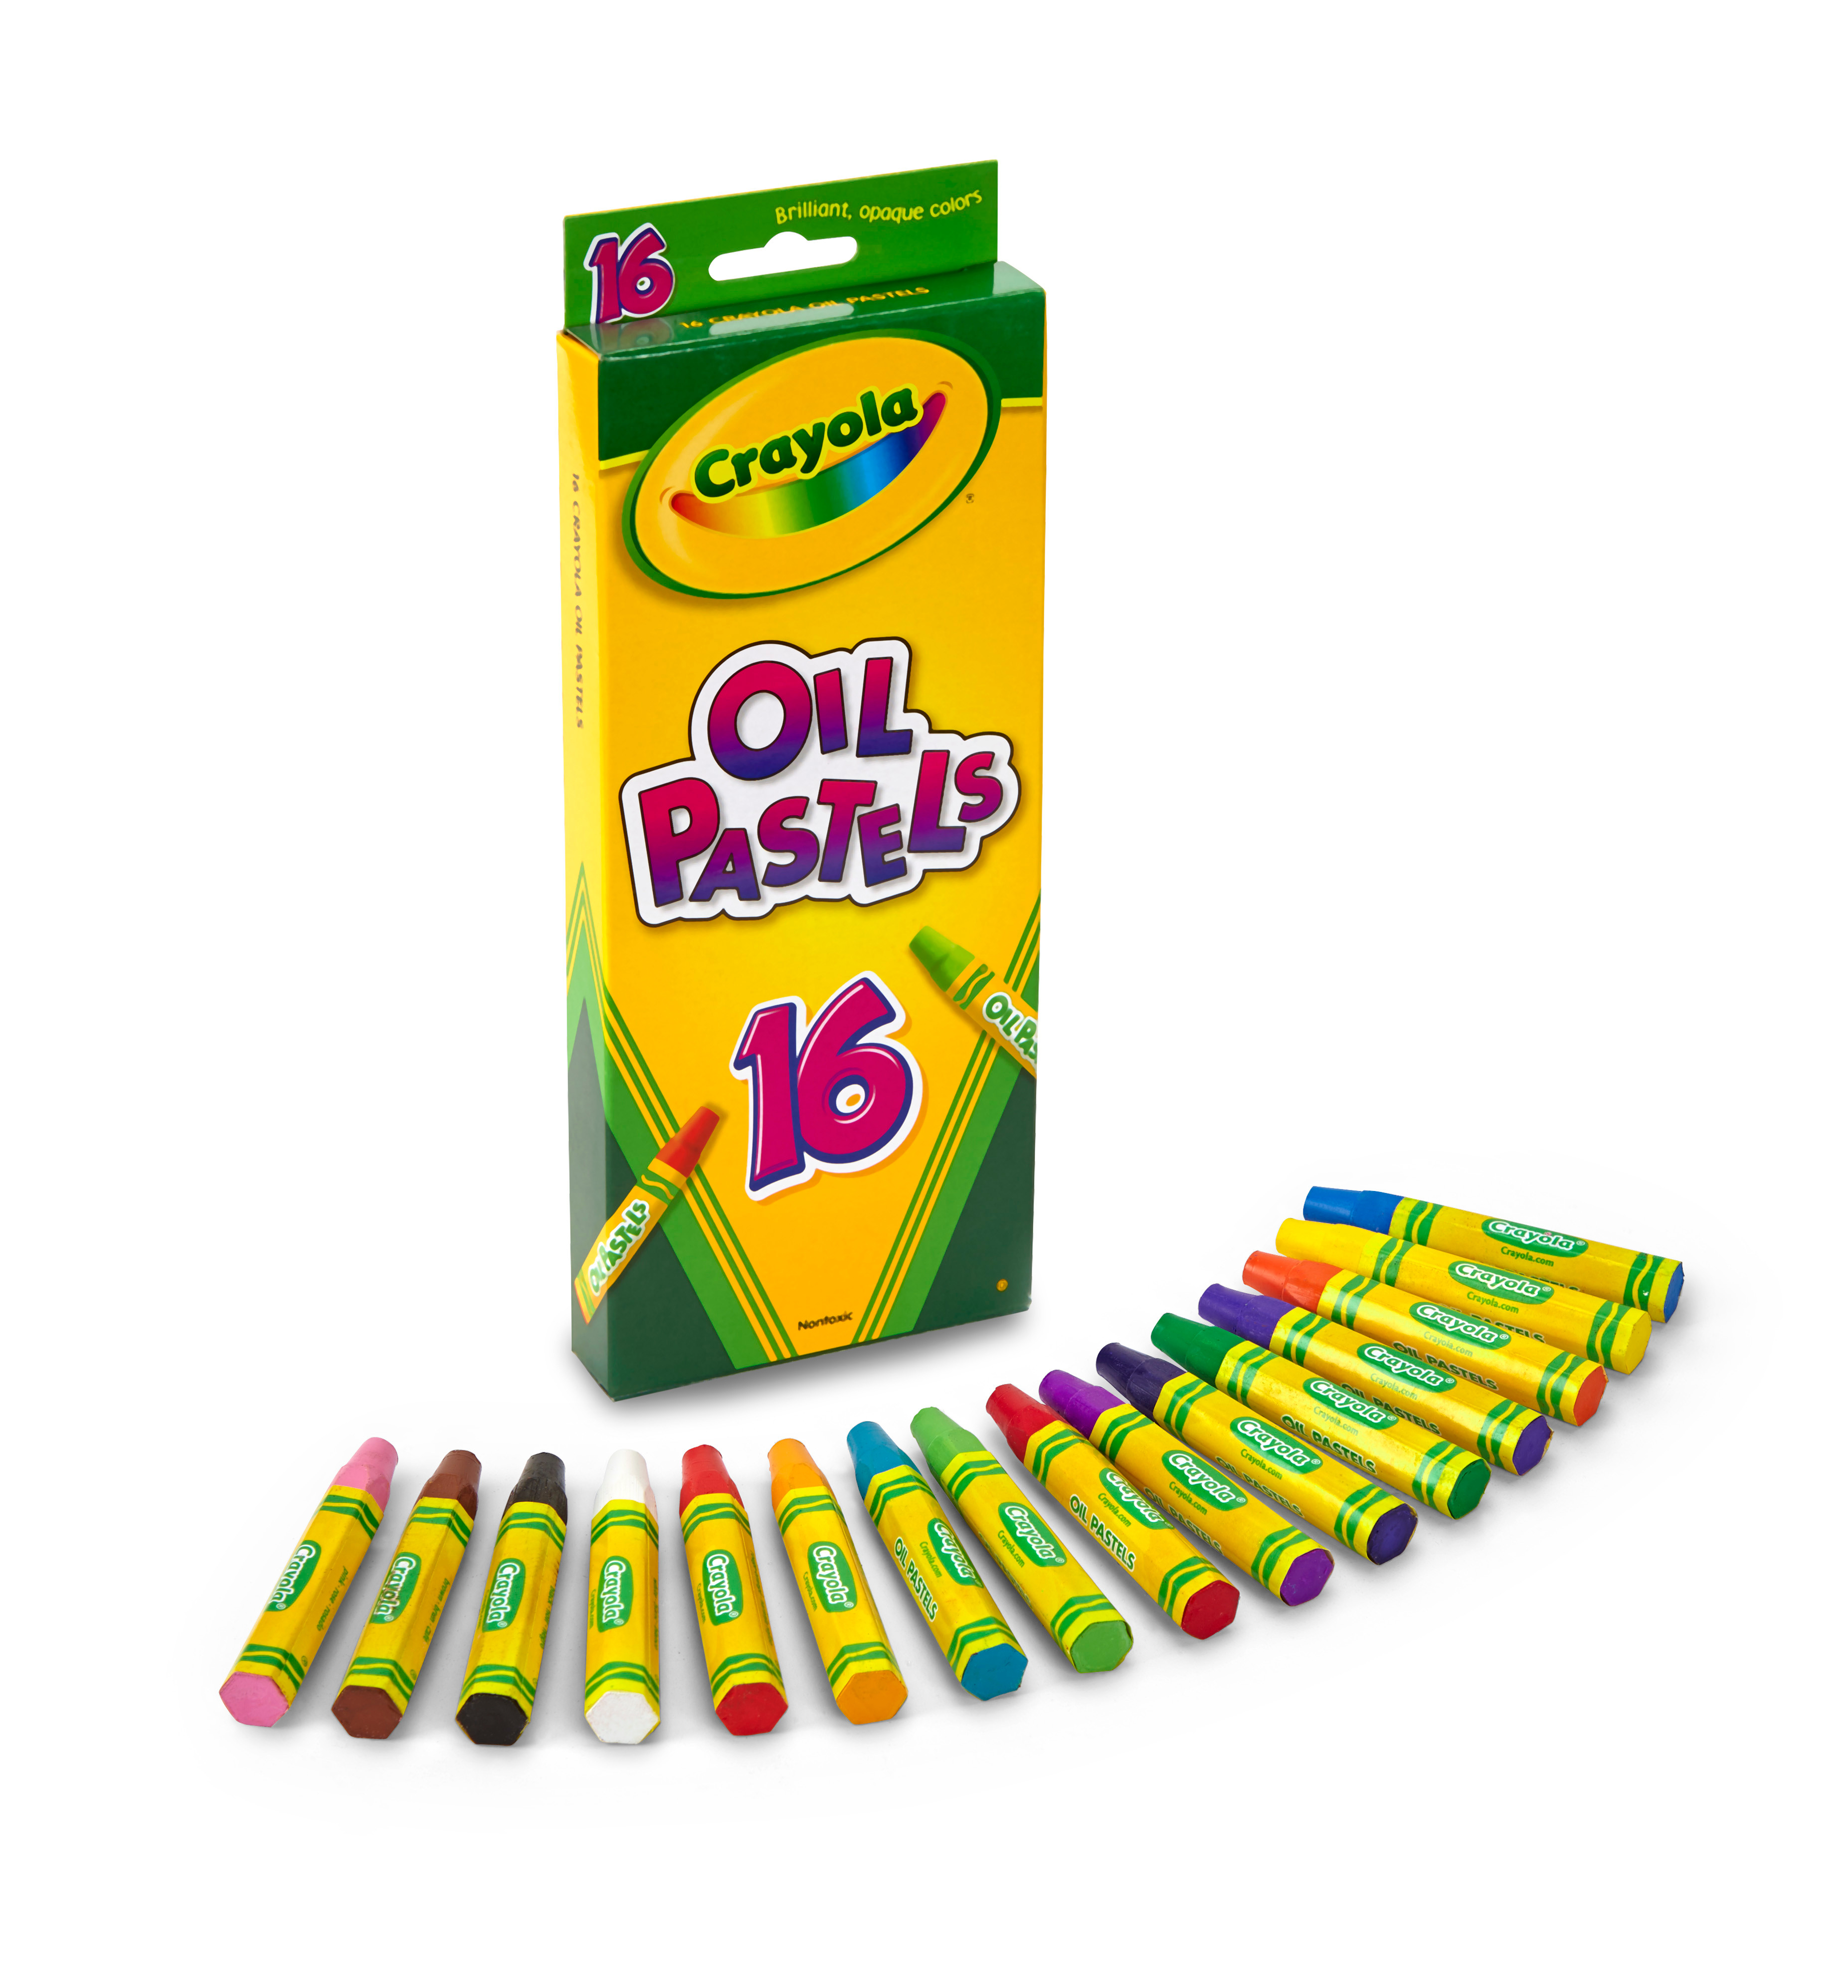 Crayola Oil Pastels, Assorted Colors, Set of 16 - image 3 of 7